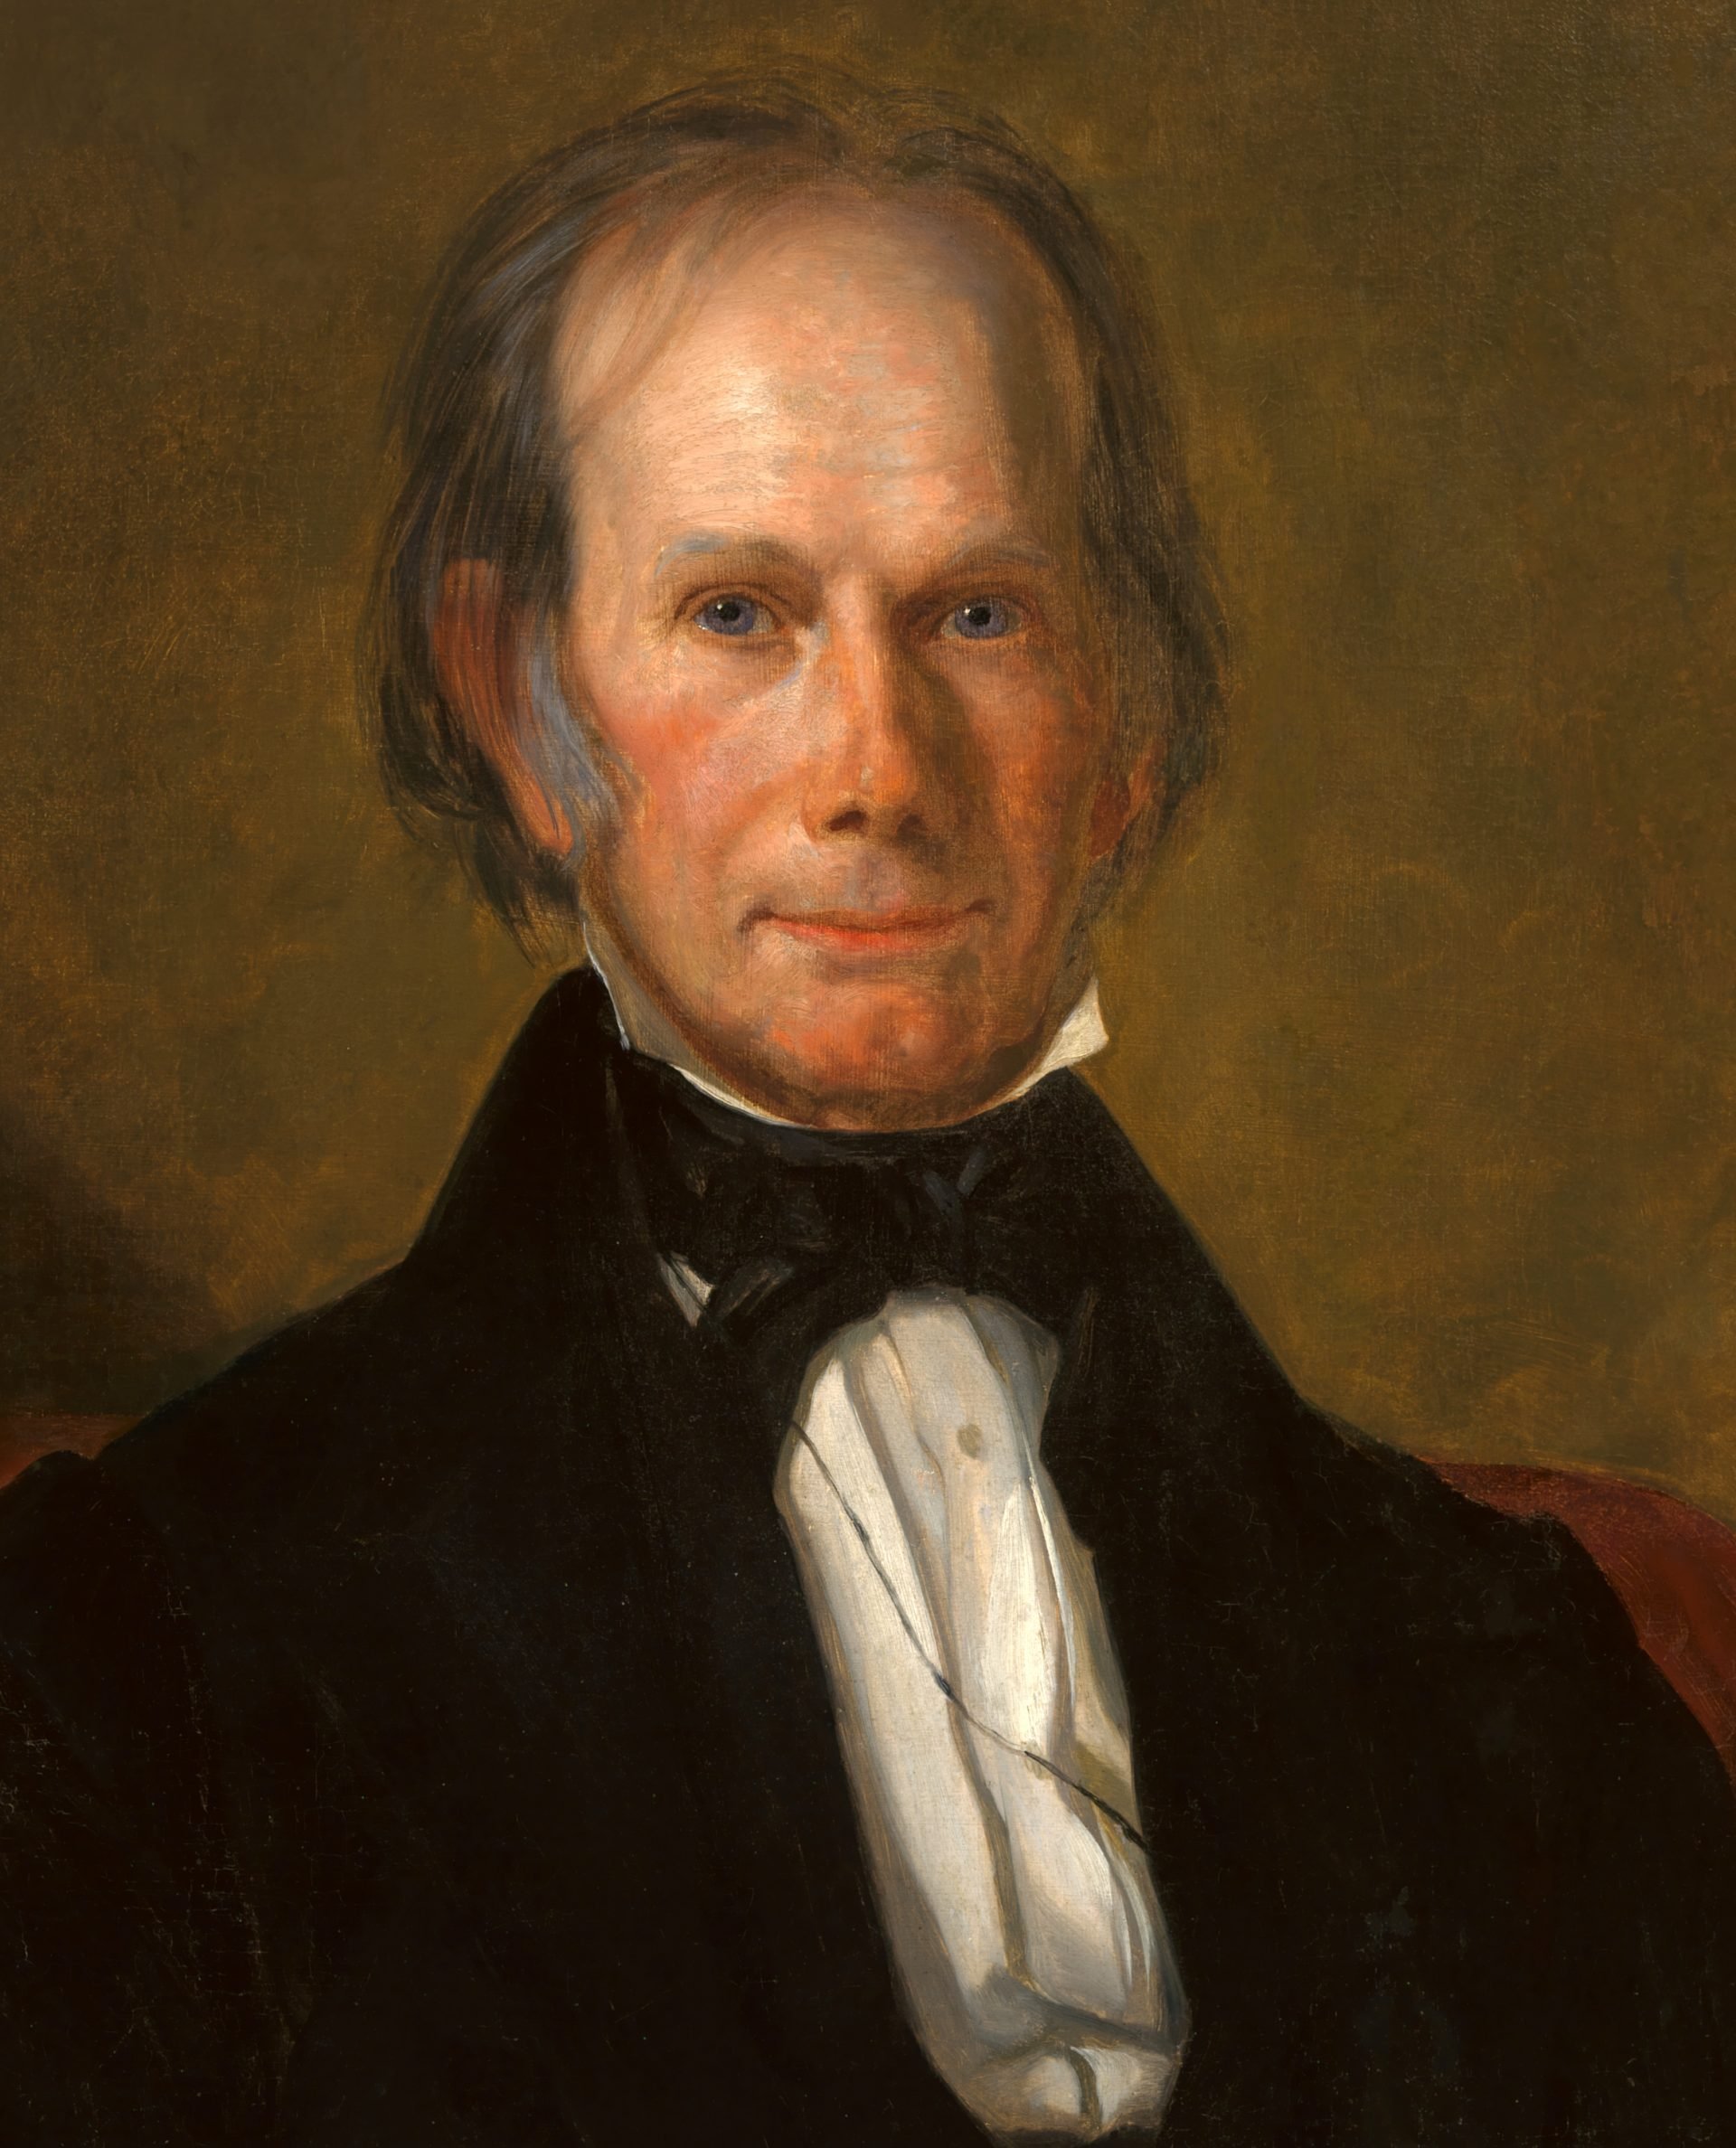 Portrait painting of Henry Clay by George Peter Alexander Healy in 1845, displayed at the National Portrait Gallery. Clay is depicted with a solemn expression, his head slightly tilted to one side. He has a high forehead, receding hairline, and wears a black suit with a white shirt and black bow tie. The background is a warm, muted gold, highlighting his face and attire.